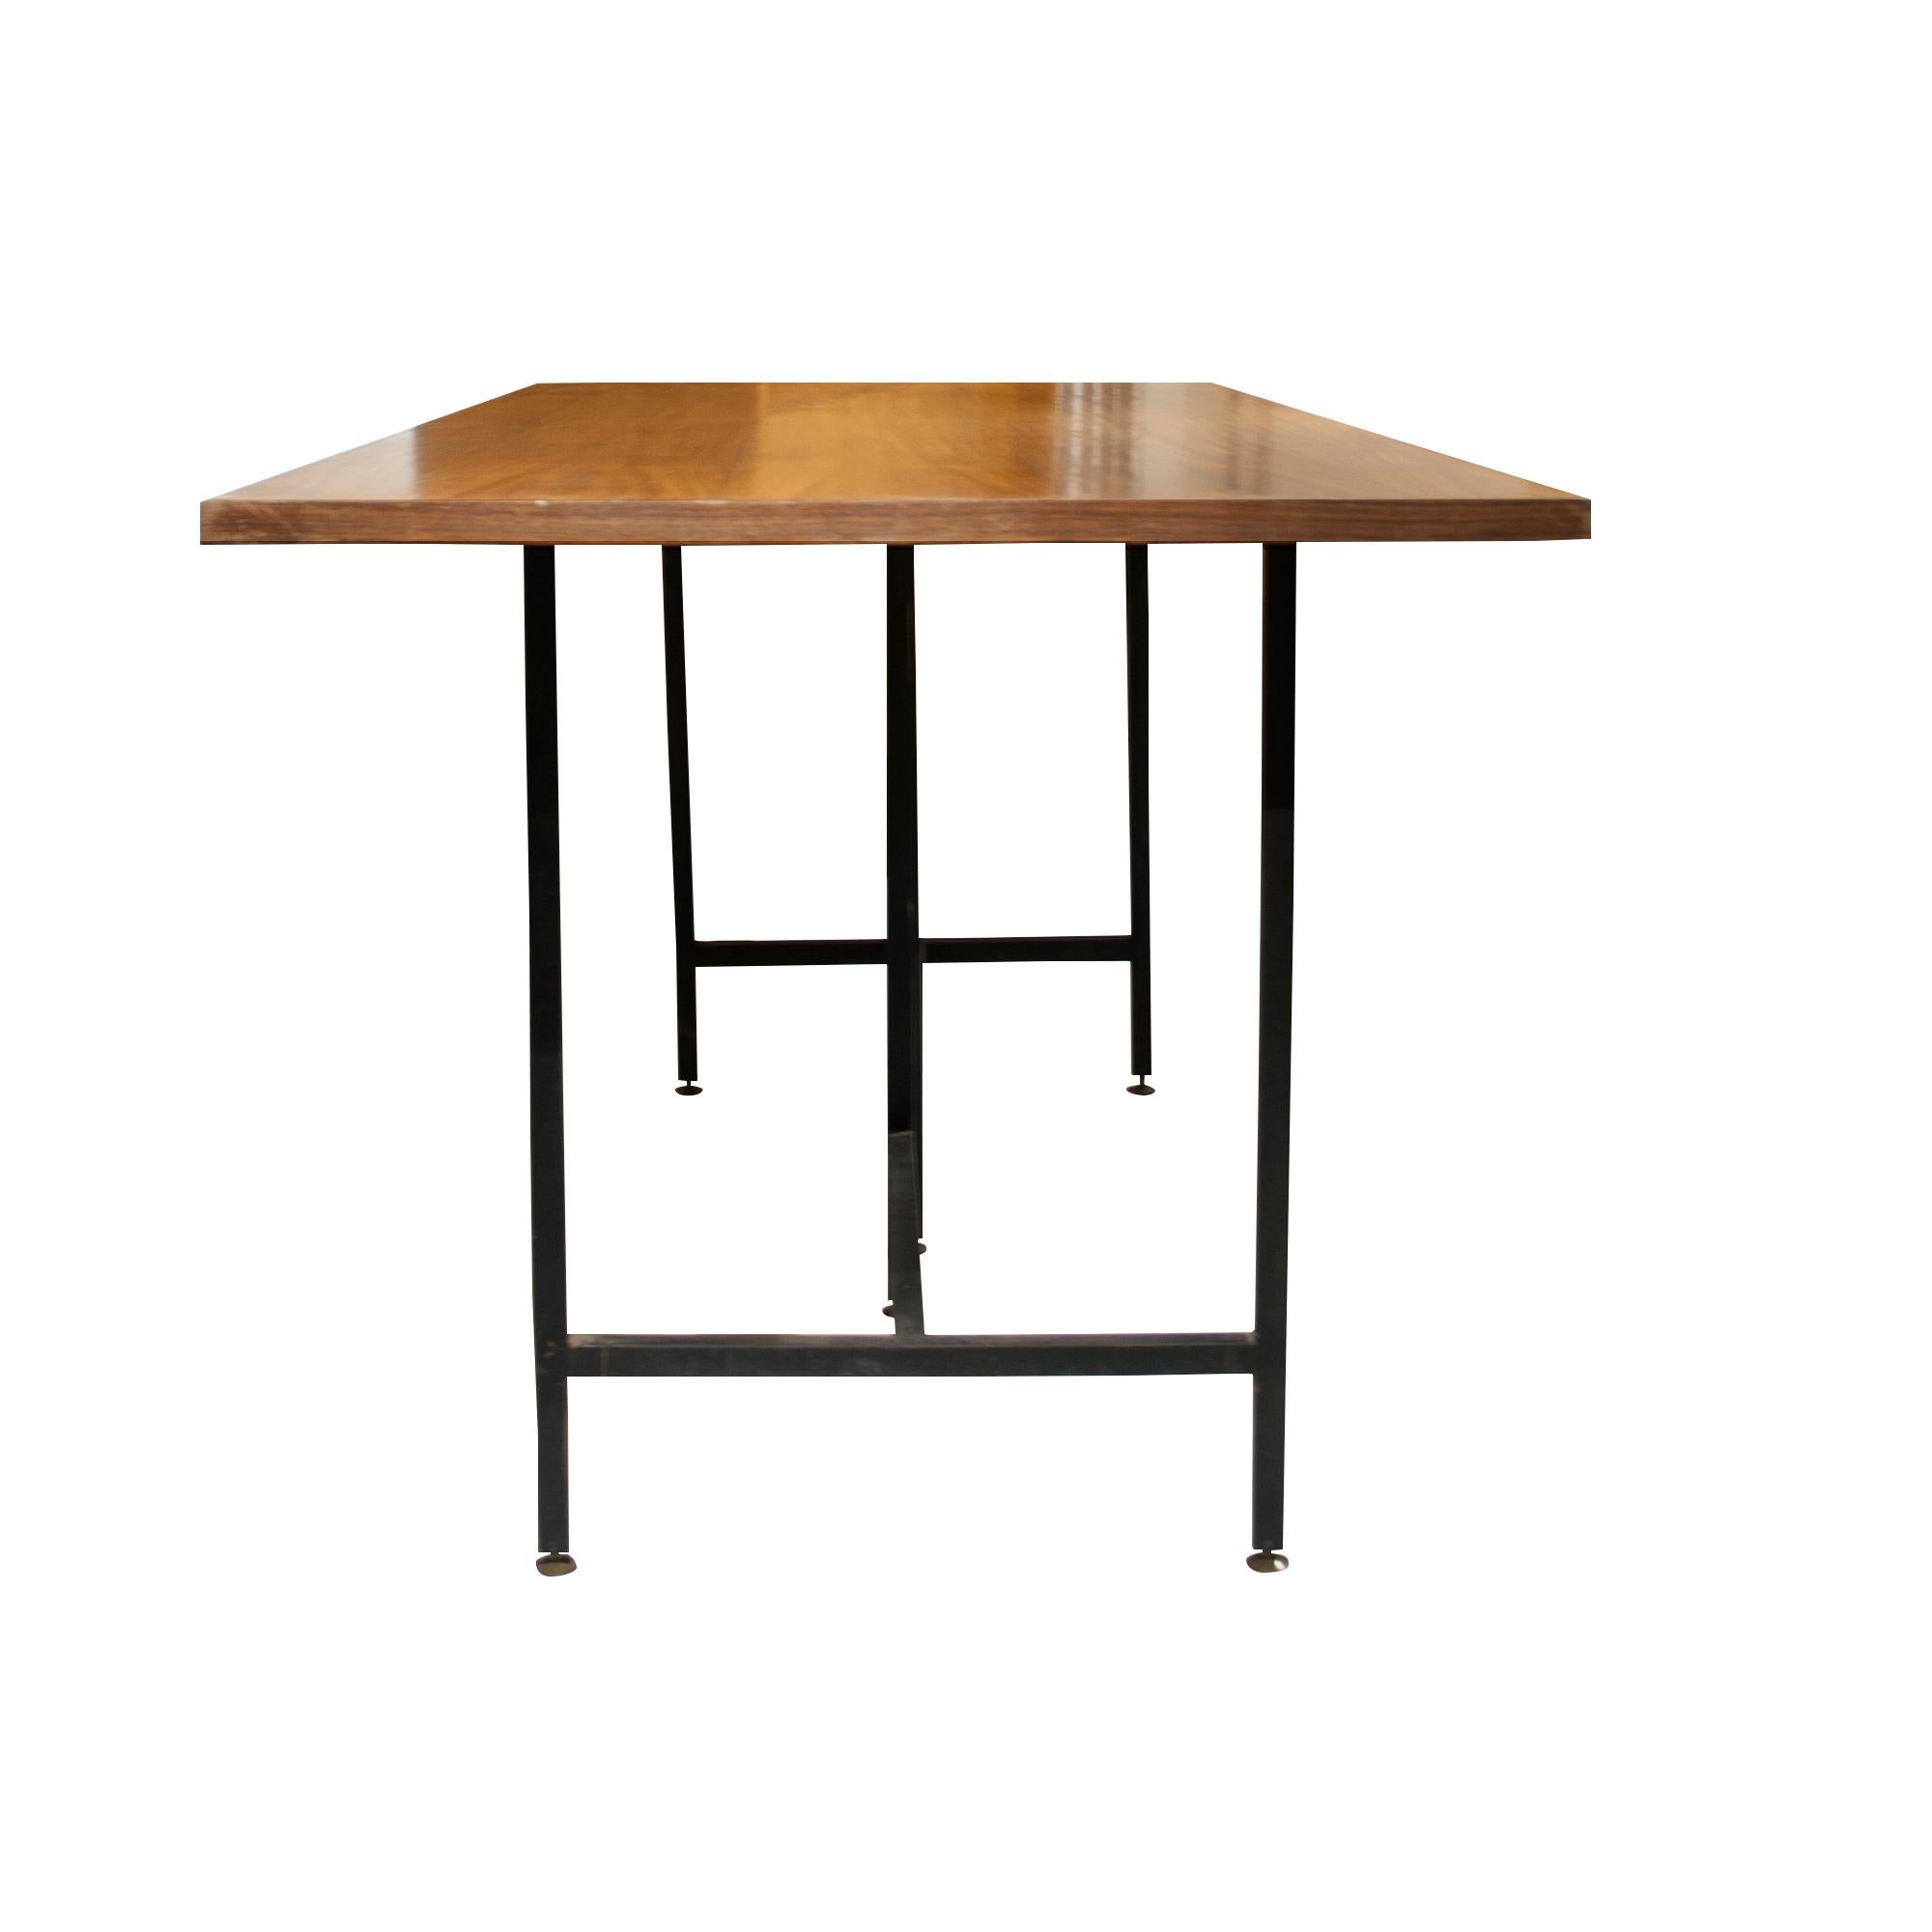 Italian Mid-Century Modern Teak Wooden Desk With Black Lacquered Iron Base, Italy, 1950  For Sale